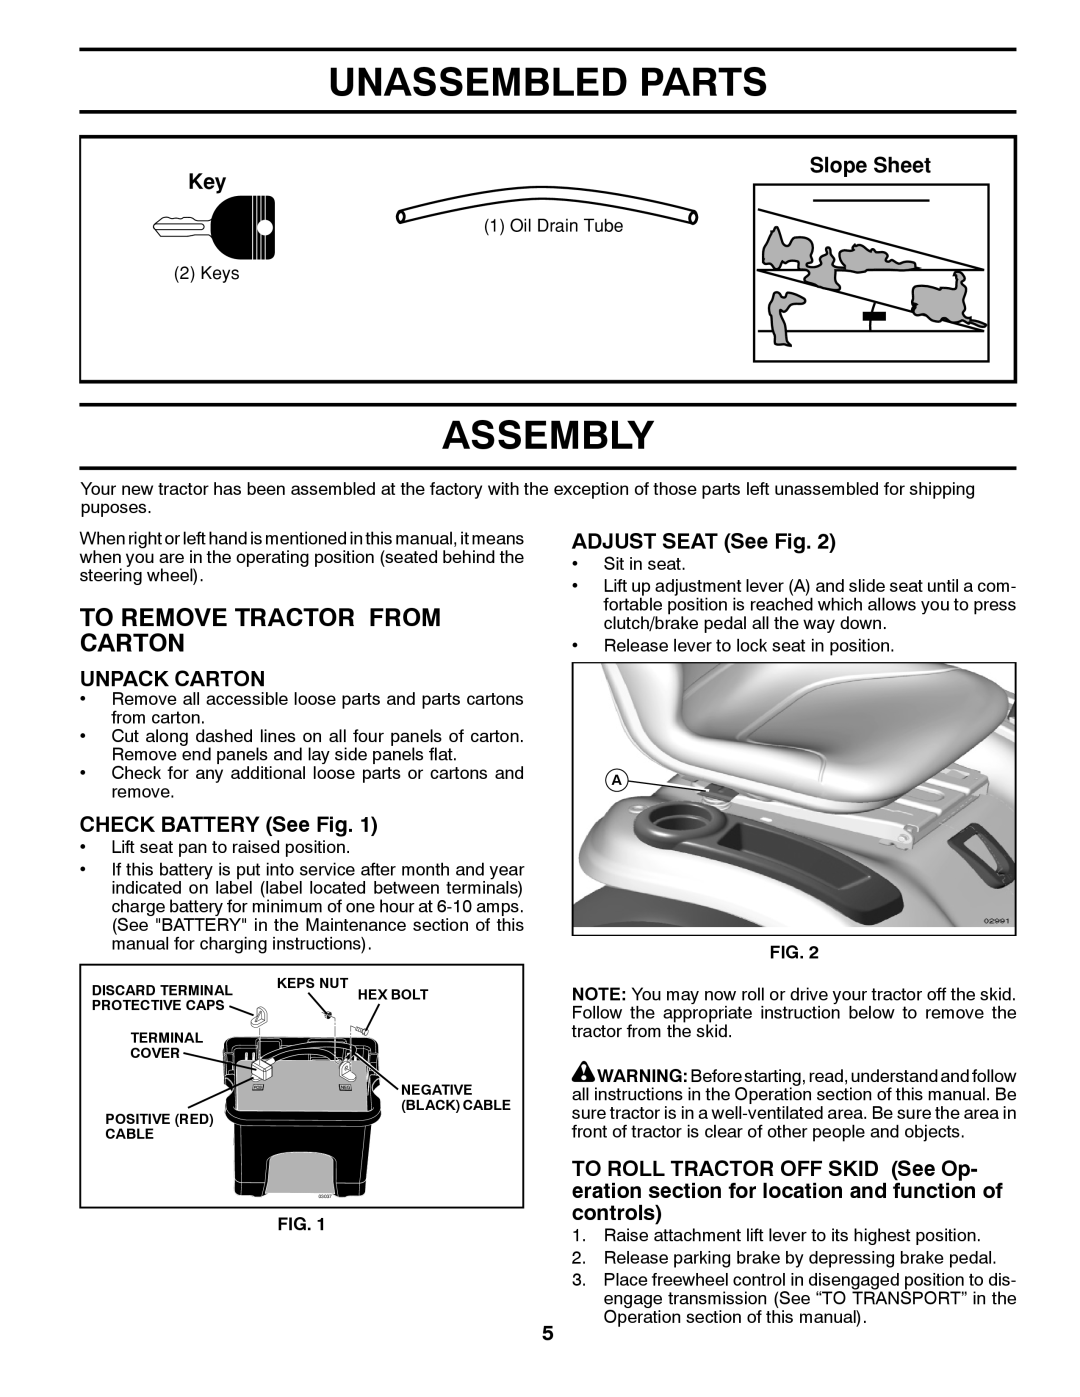 Poulan 412412 manual Unassembled Parts, Assembly, To Remove Tractor From Carton, Slope Sheet Key, Unpack Carton 